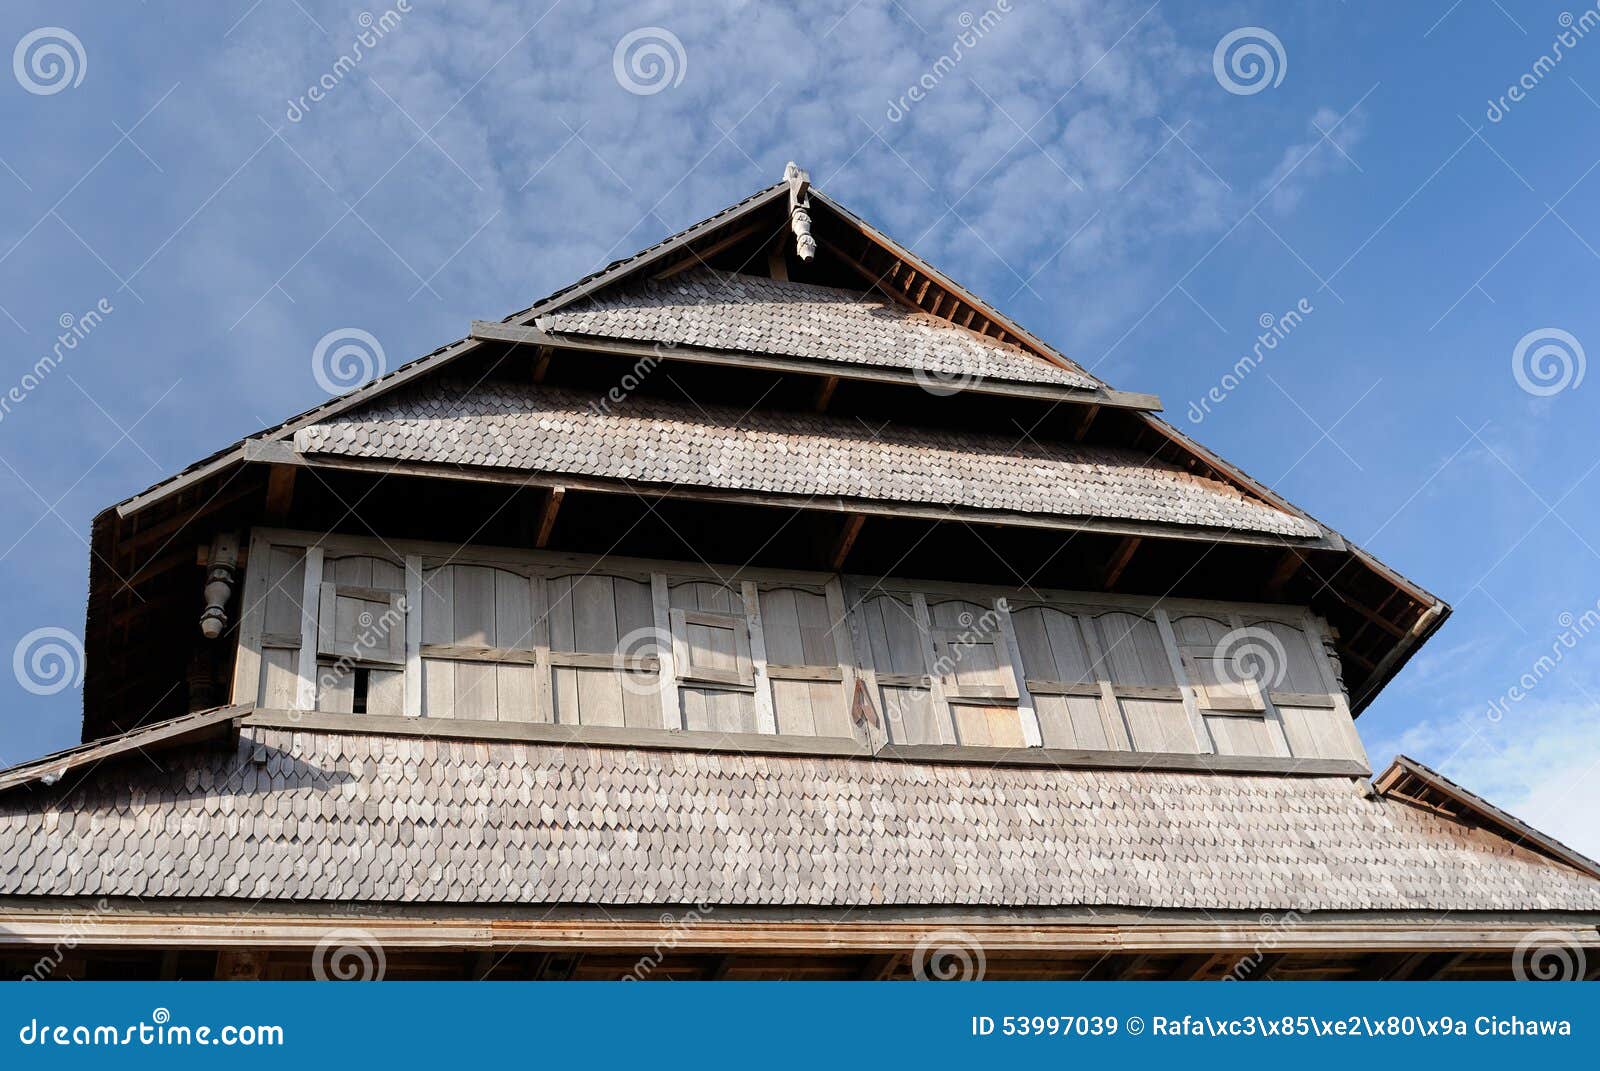 wooden rumah istana sumbawa palace of the sultan in the sumbawa besar town in indonesia